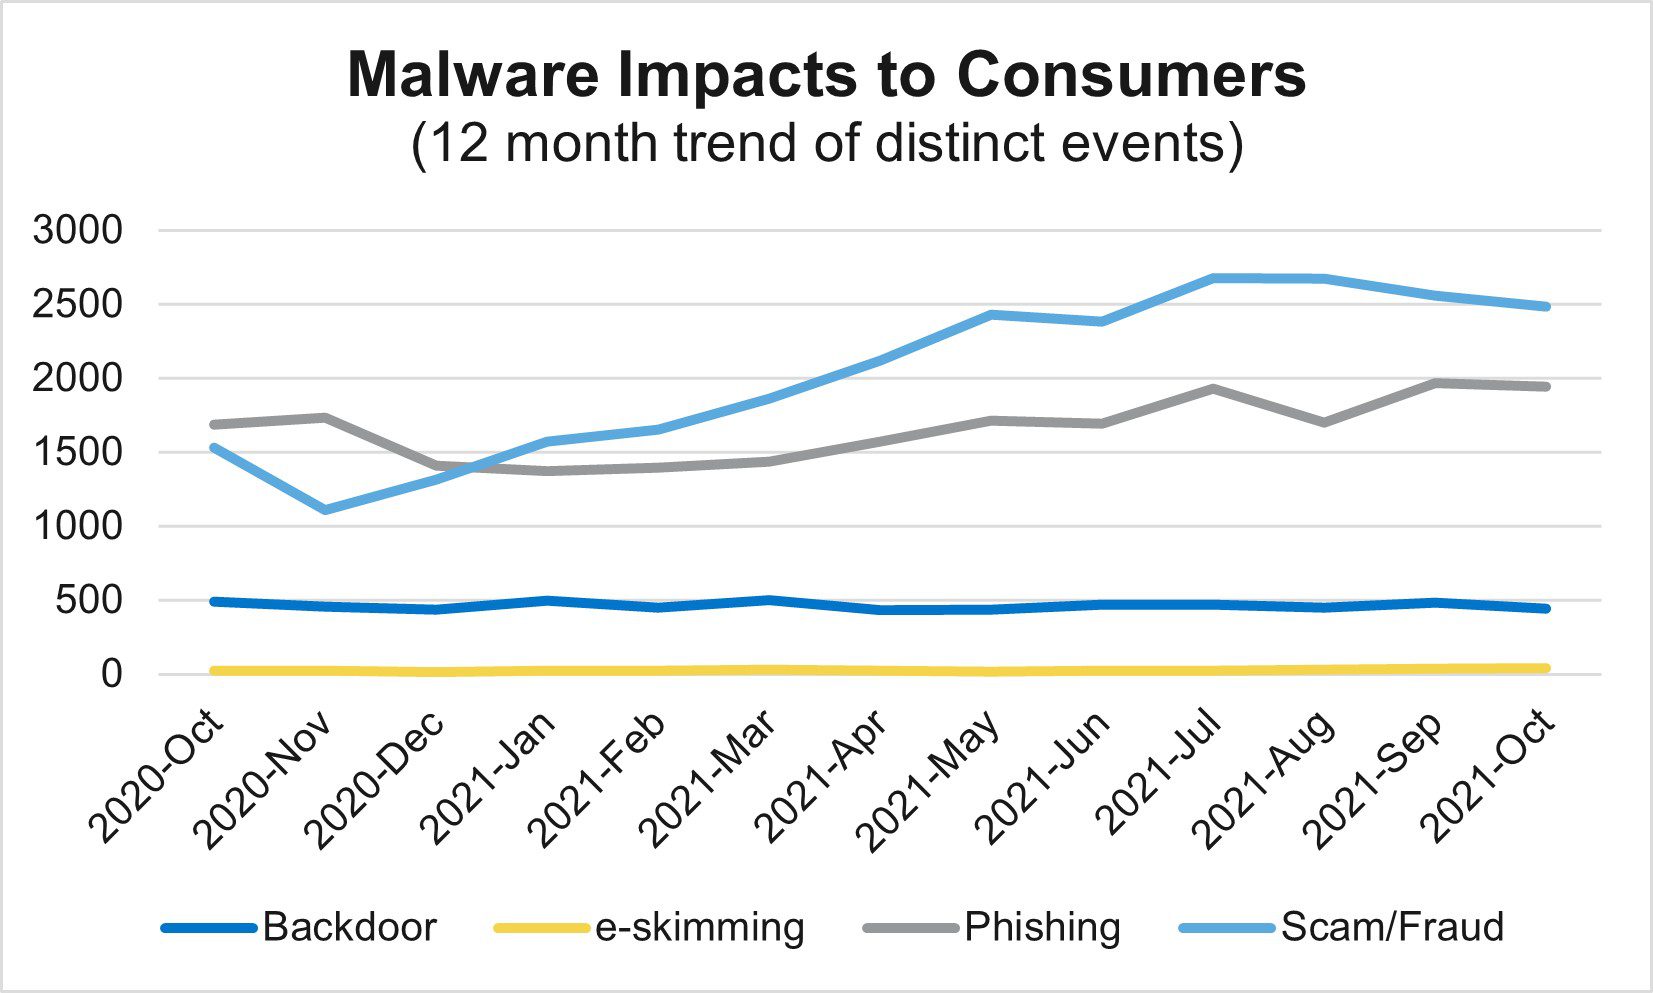 How different malware incidents harm consumers